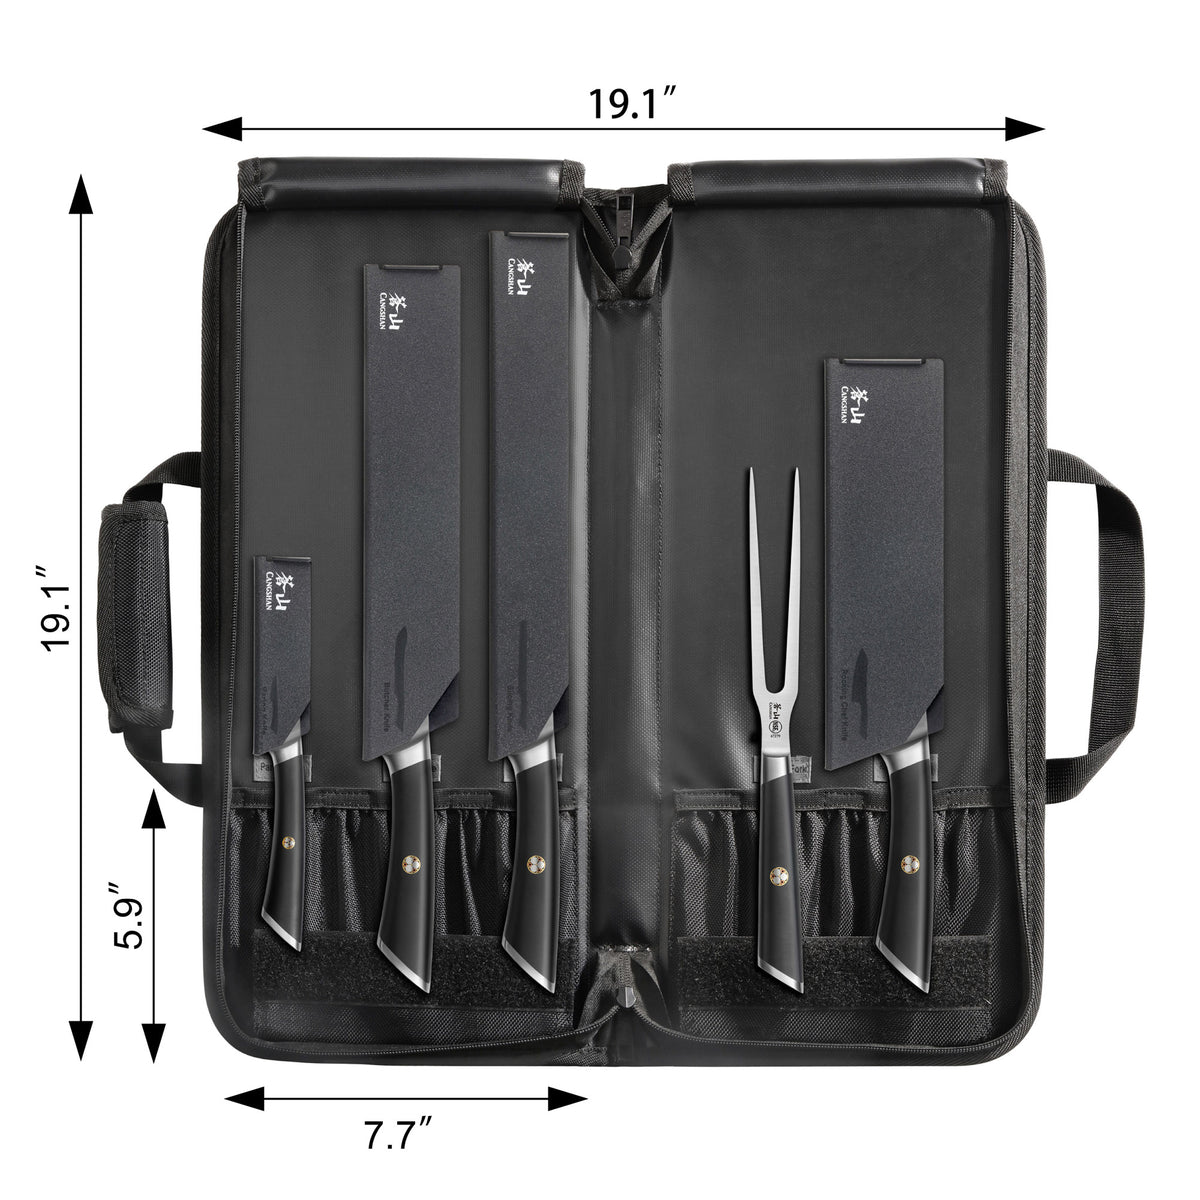 10 Amazing Cangshan X Series 59915 6-Piece German Steel Forged Knife Block  Set for 2023